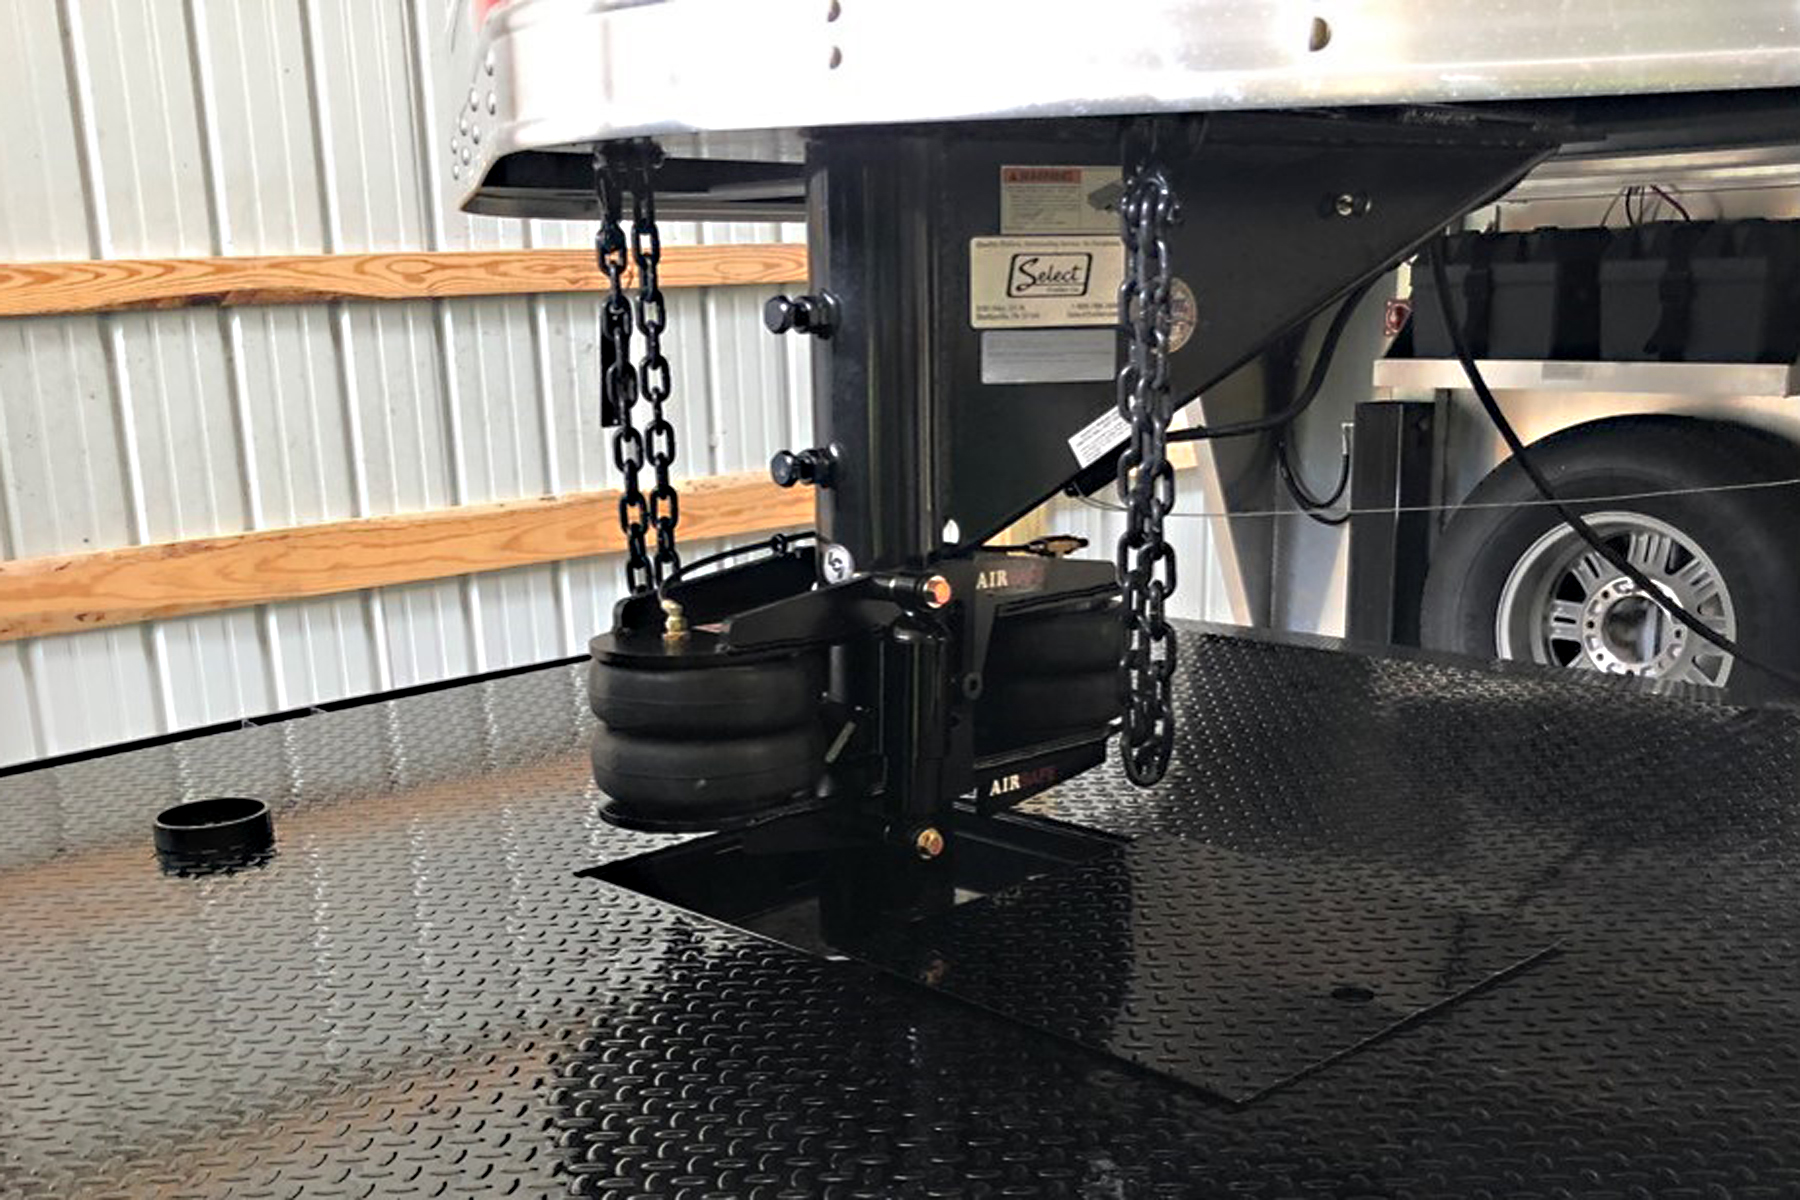 A Better Gooseneck Hitch To Make Towing Safer And Less Stressful